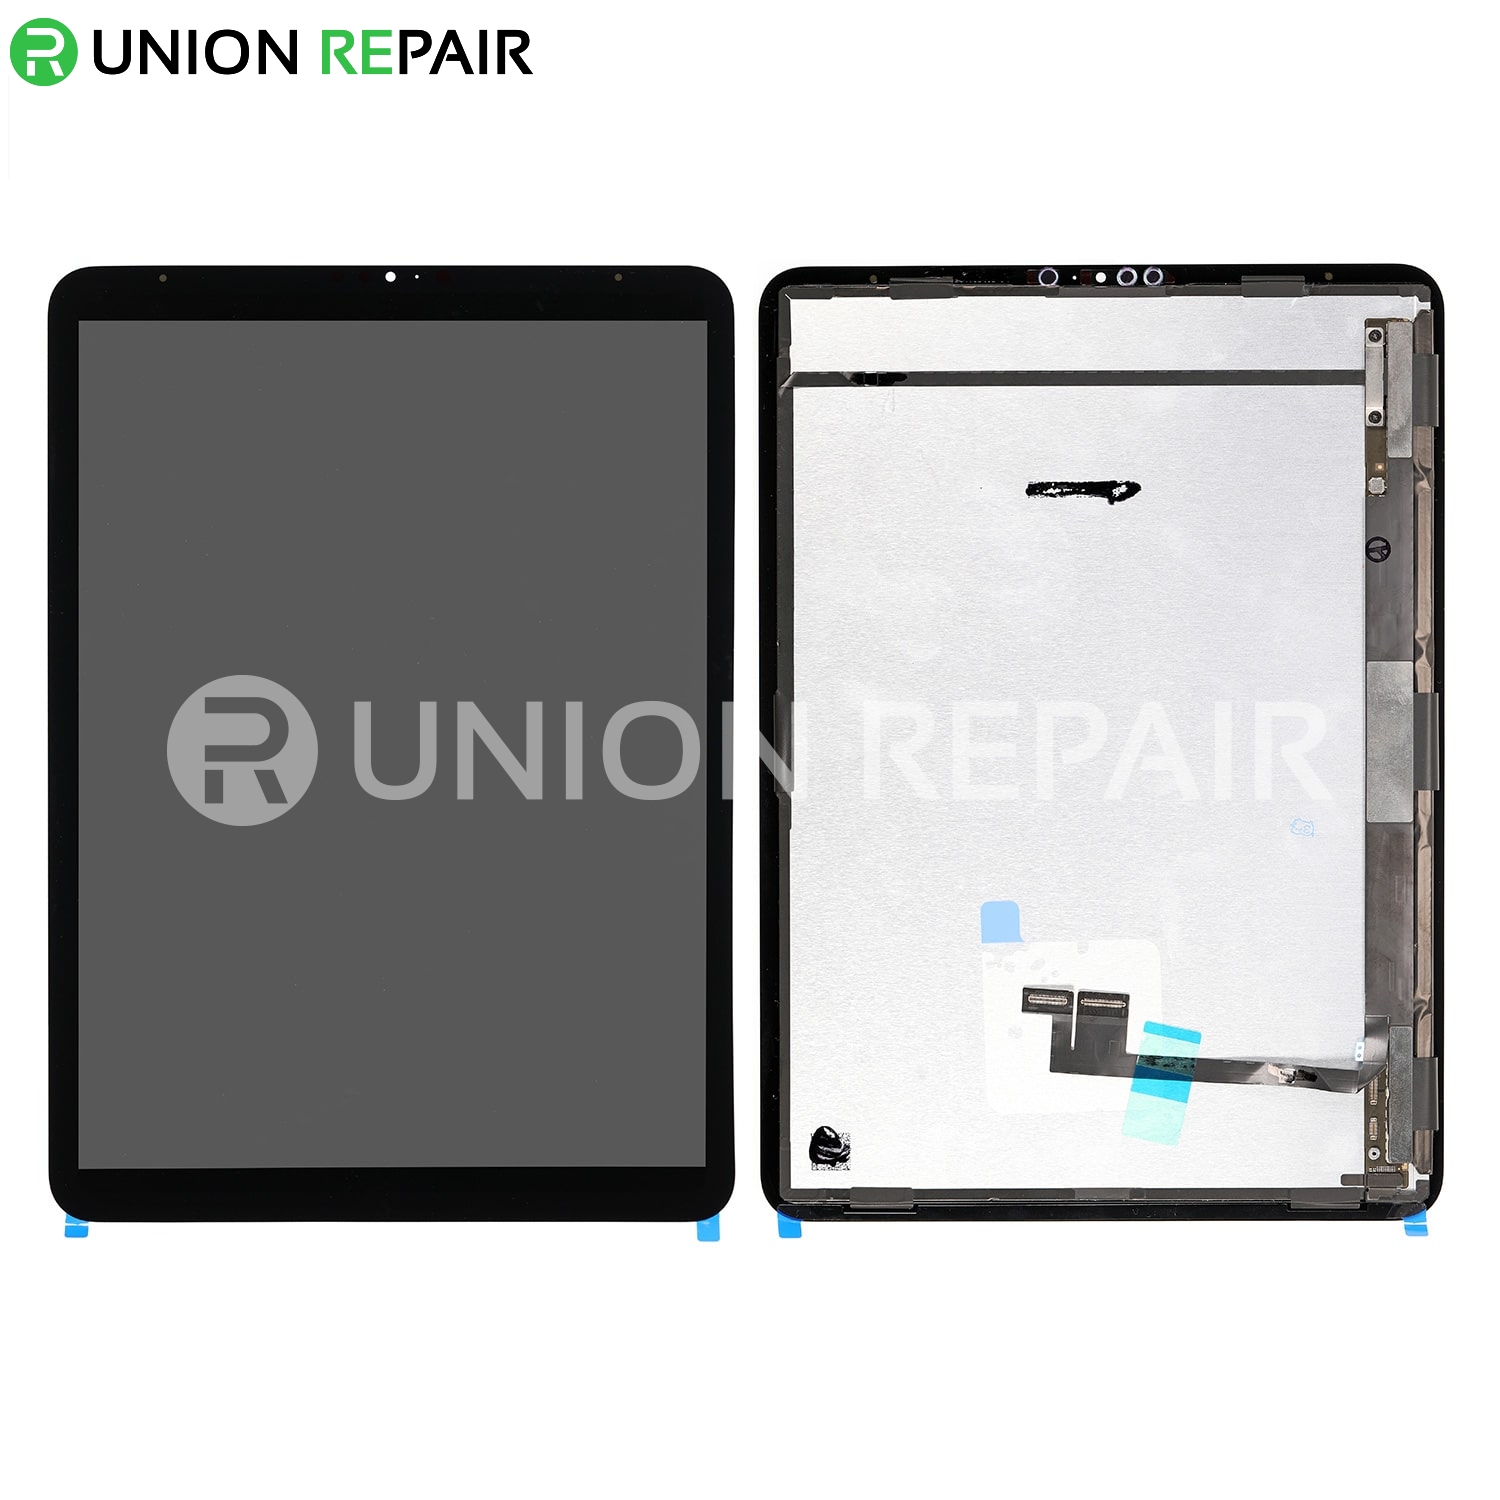 Buy iPad 6th Gen (2018) 9.7 Touch Screen Digitizer Replacement - Space Grey